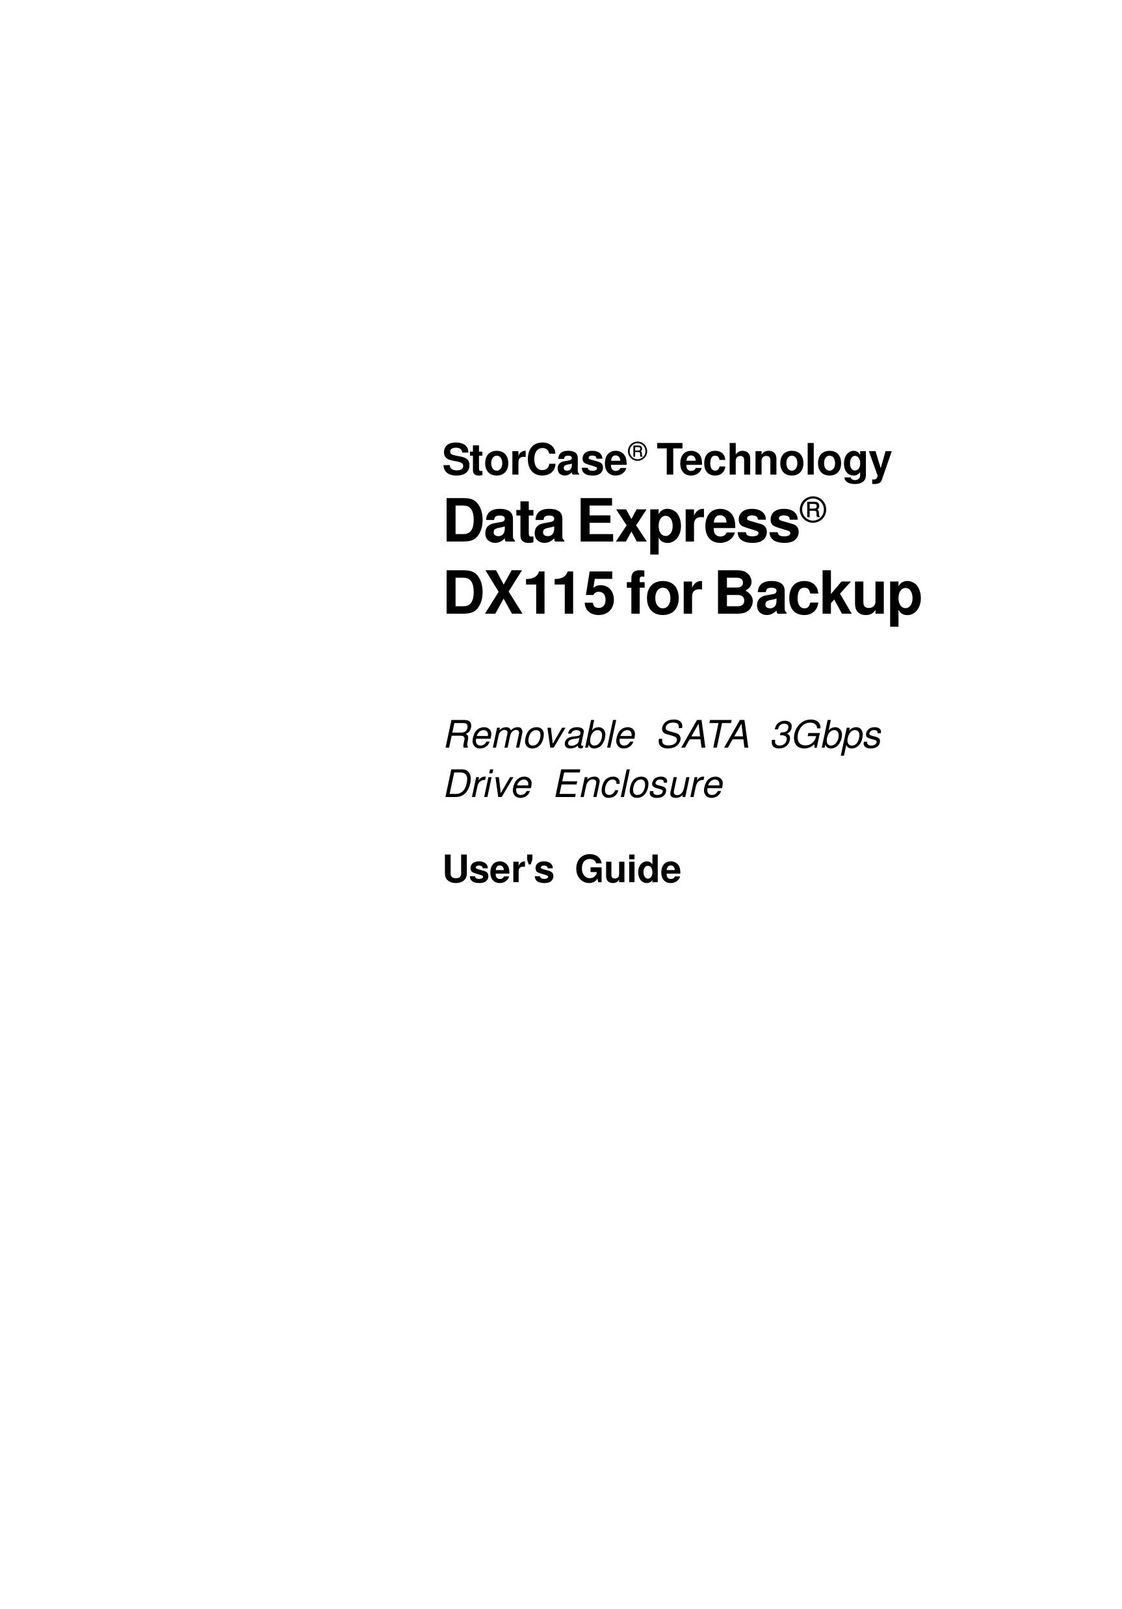 StorCase Technology DX115 Computer Drive User Manual